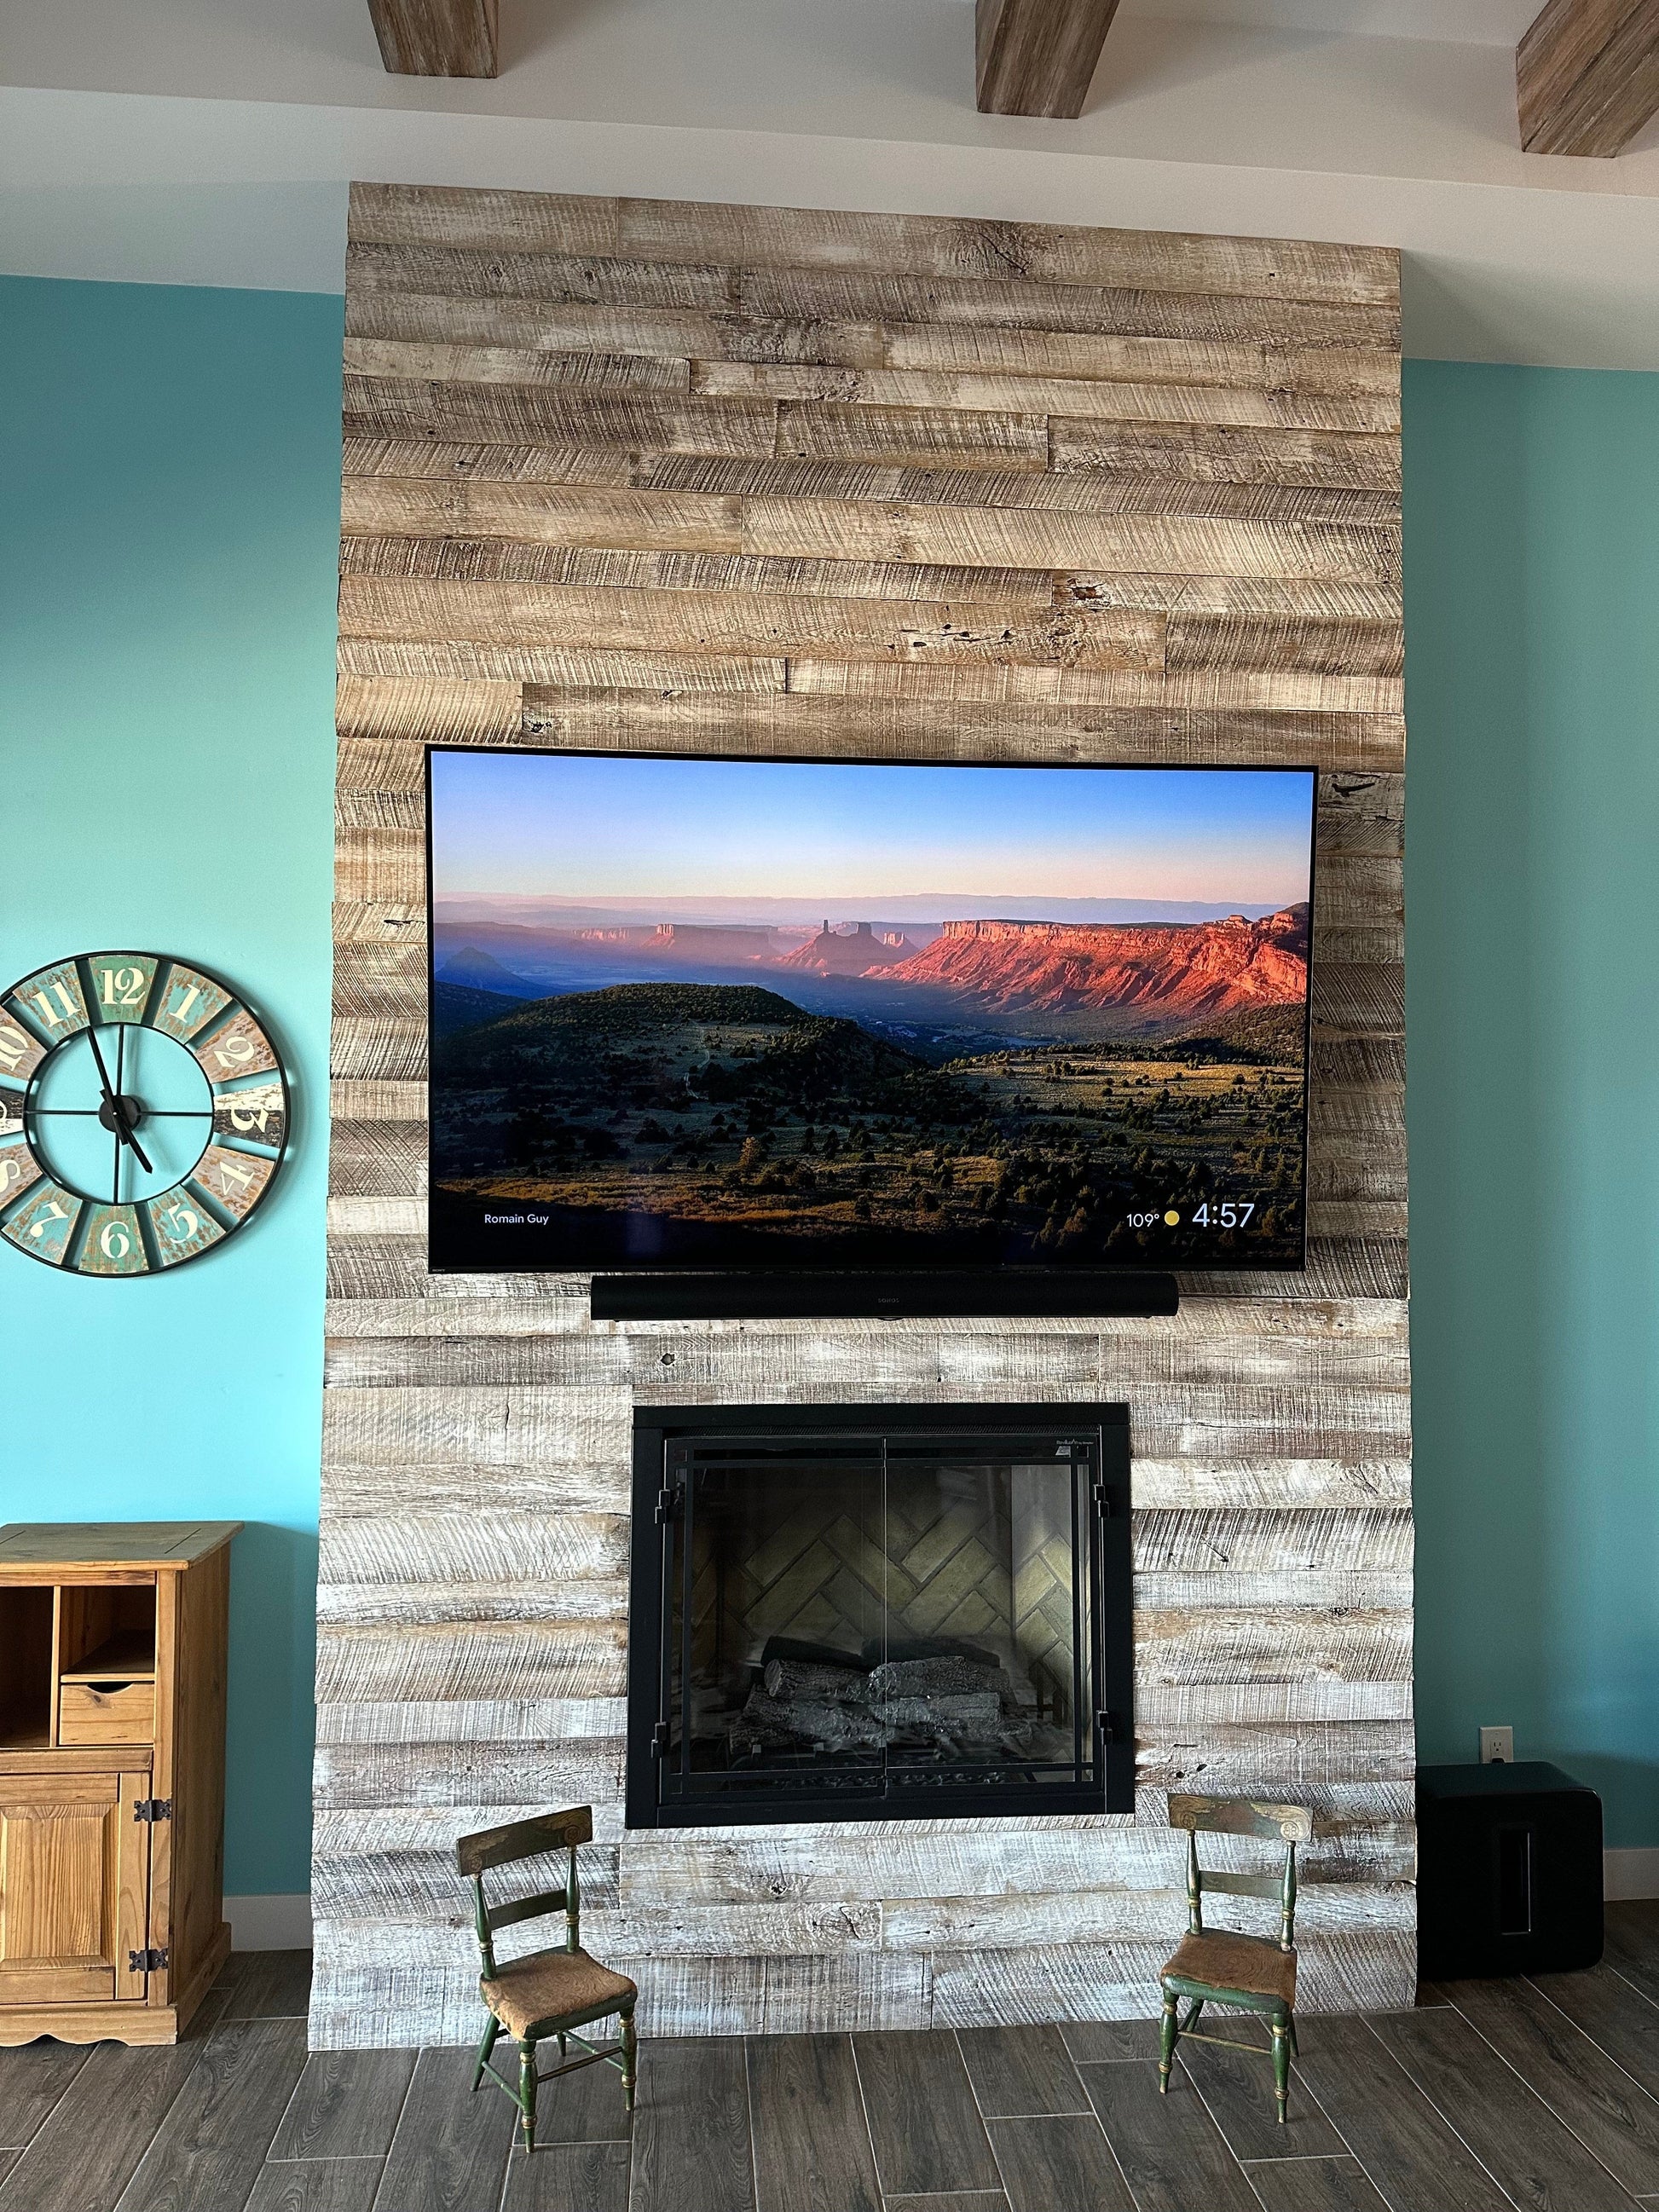 antique white reclaimed barnwood planks used to wrap a fireplace jut out. TV mounted towards the top with fireplace opening under the television and two small chairs for decor. Wood is brown with a white wash finish applied.